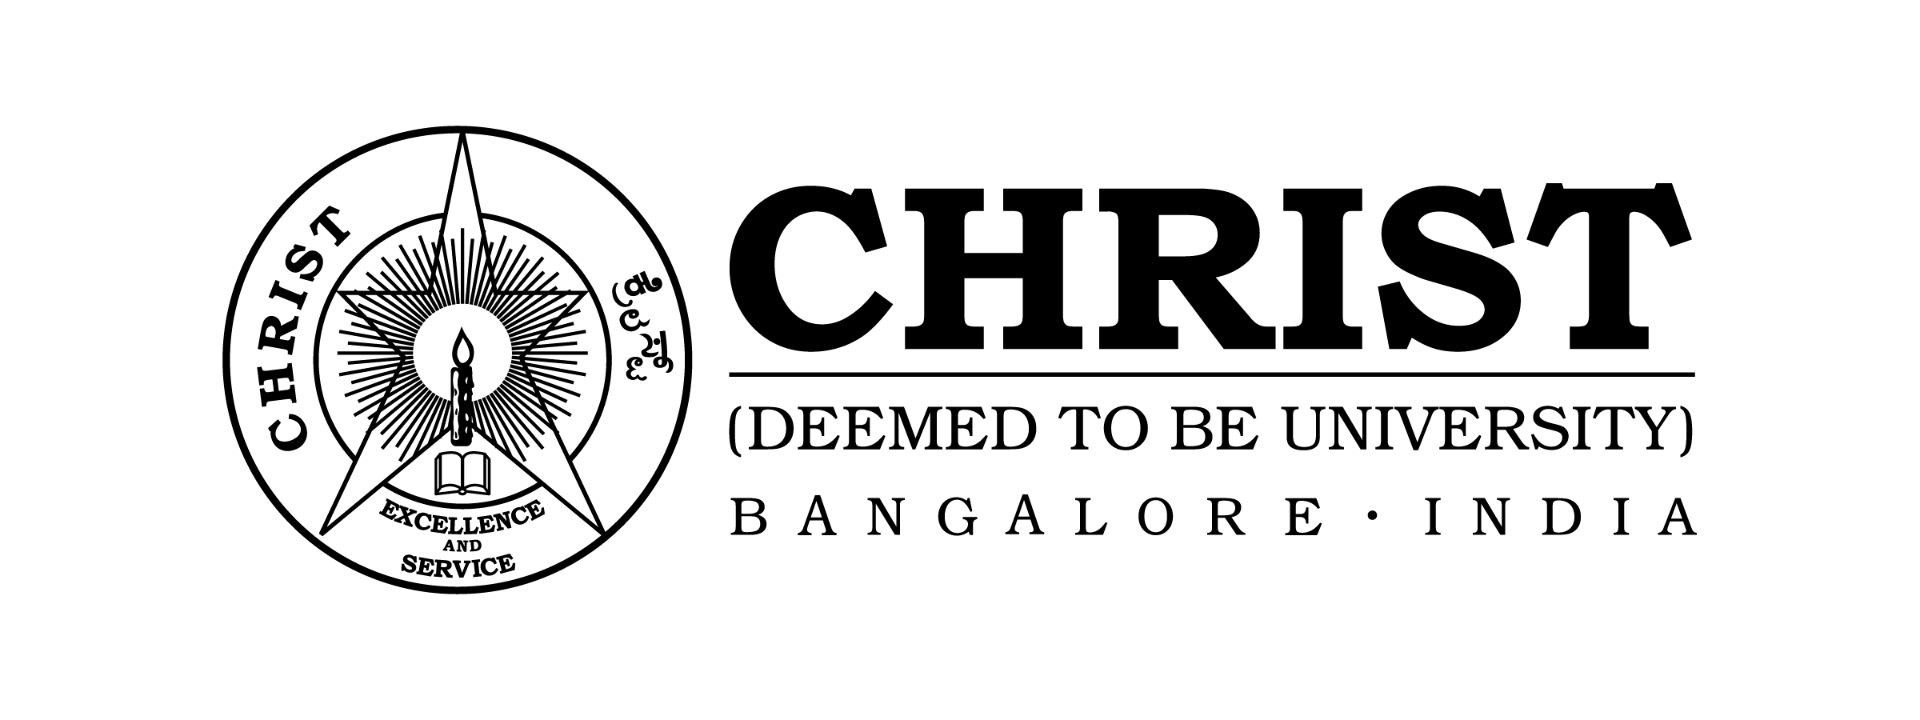 logo of CHRIST deemed to be university in bangalore india